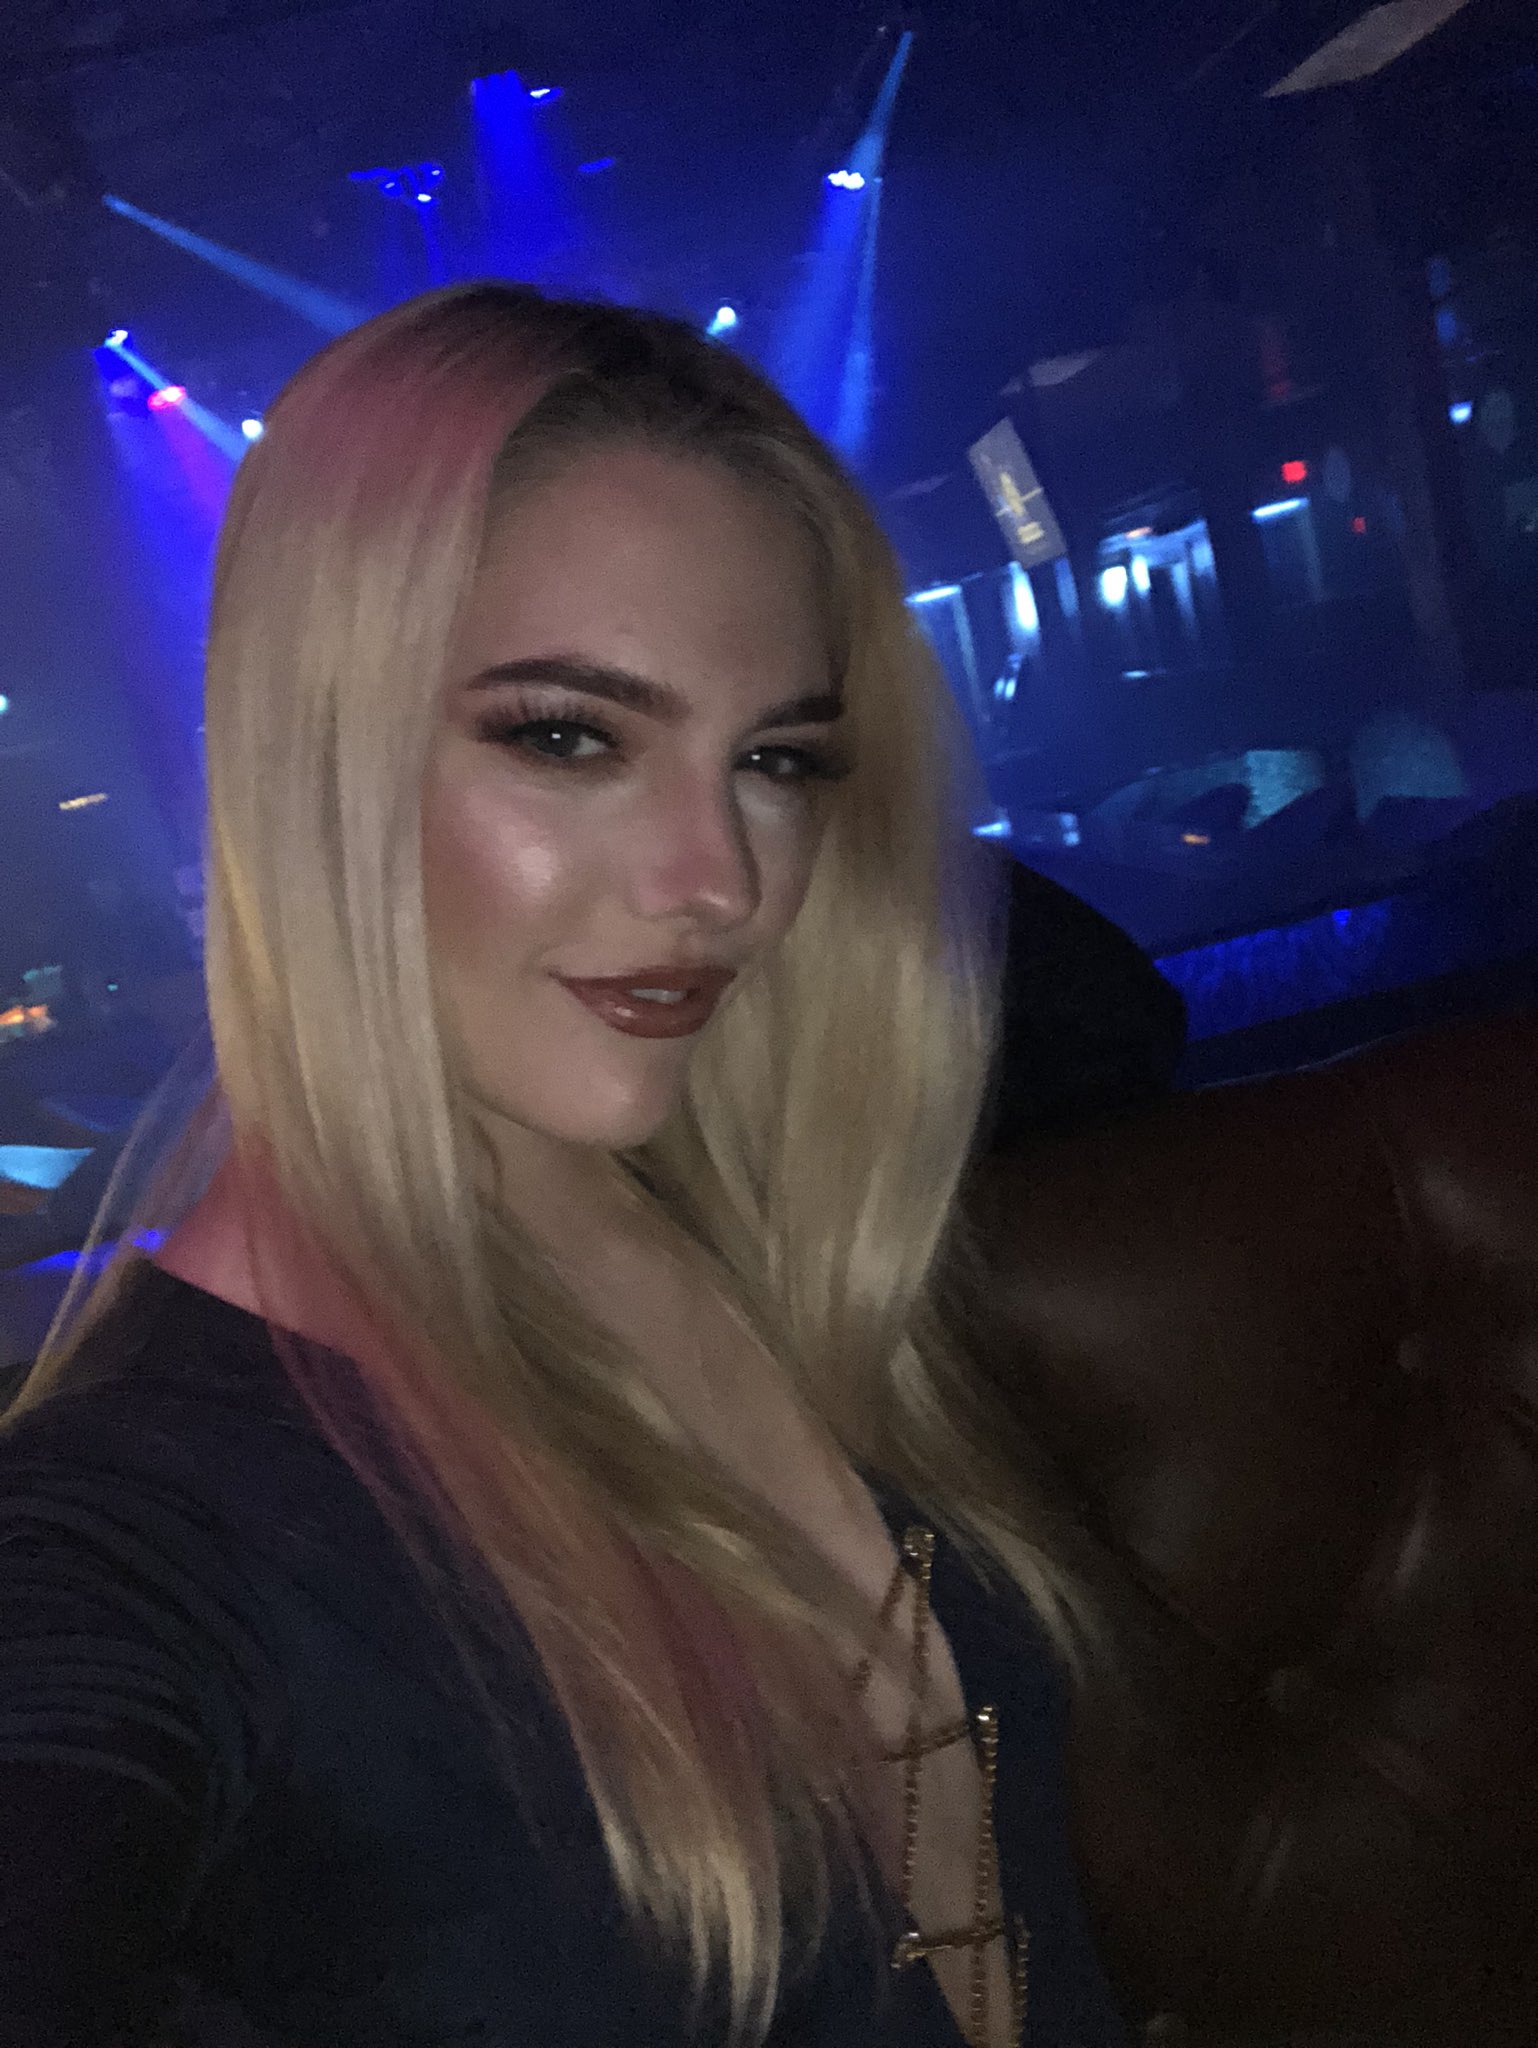 TW Pornstars Pic Kenna James INC Twitter Hanging Out At LegendsRoom With The Beautiful